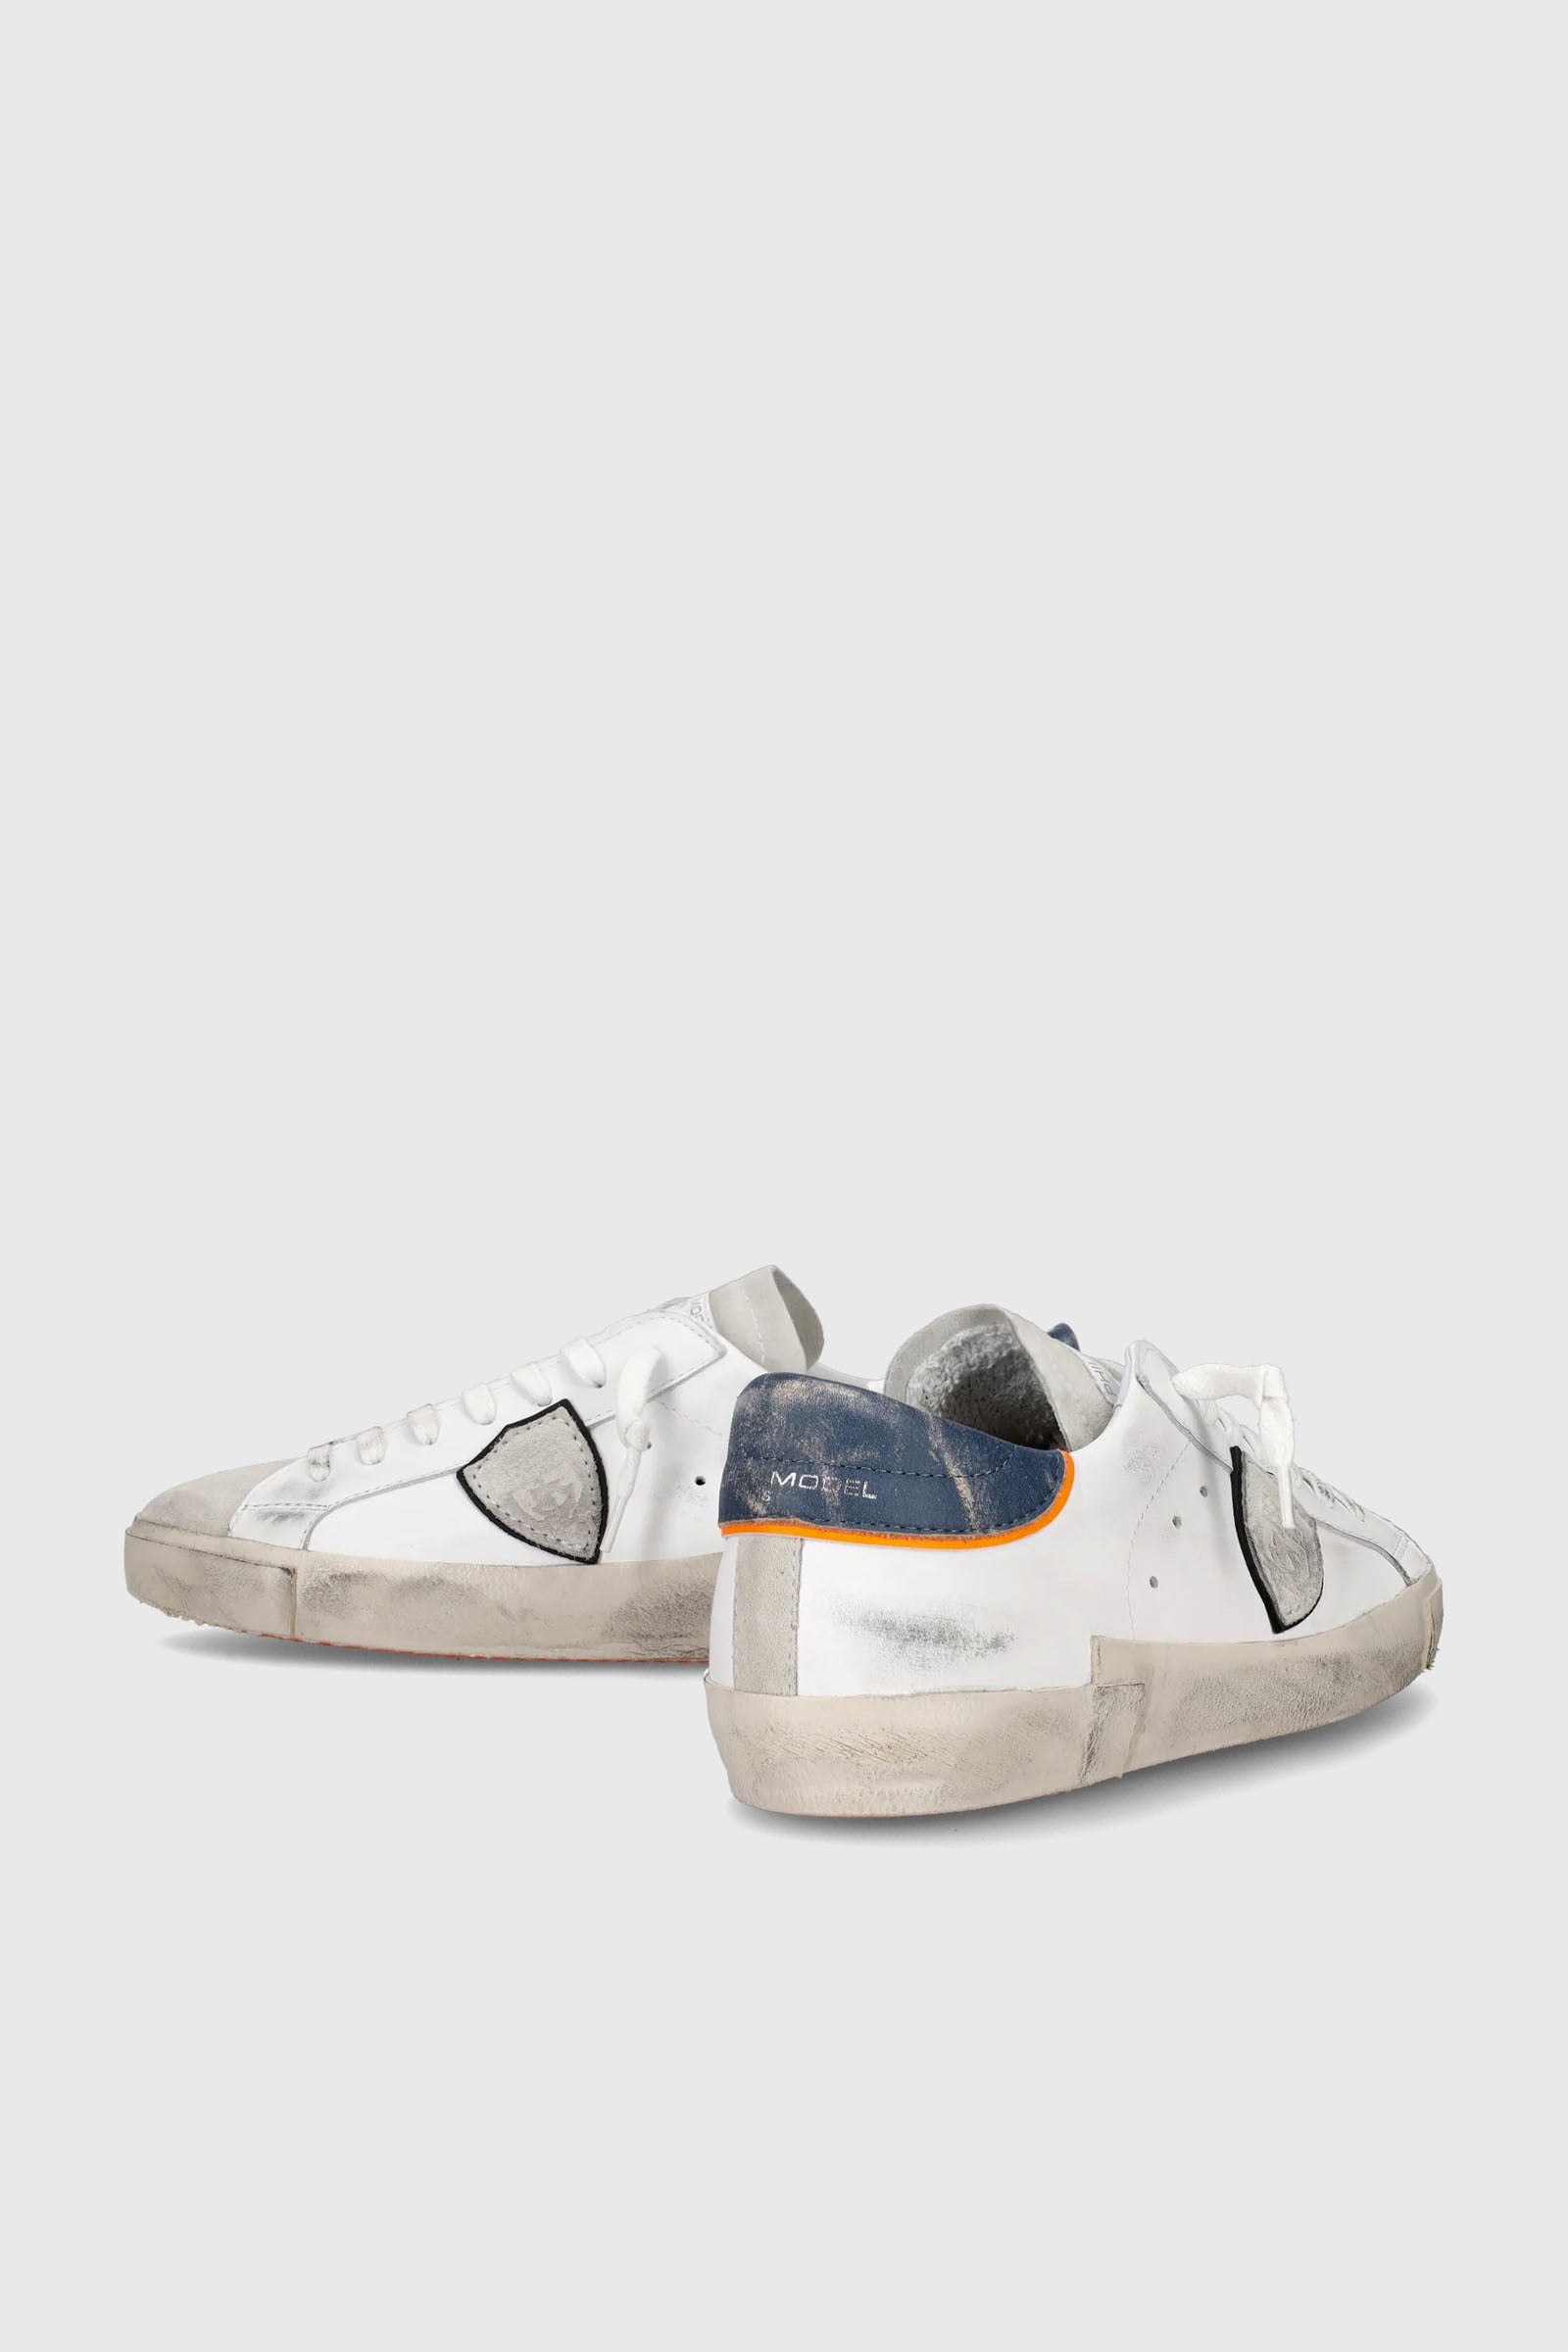 Philippe Model PRSX Vintage Veal Leather Sneakers White/Blue - 4